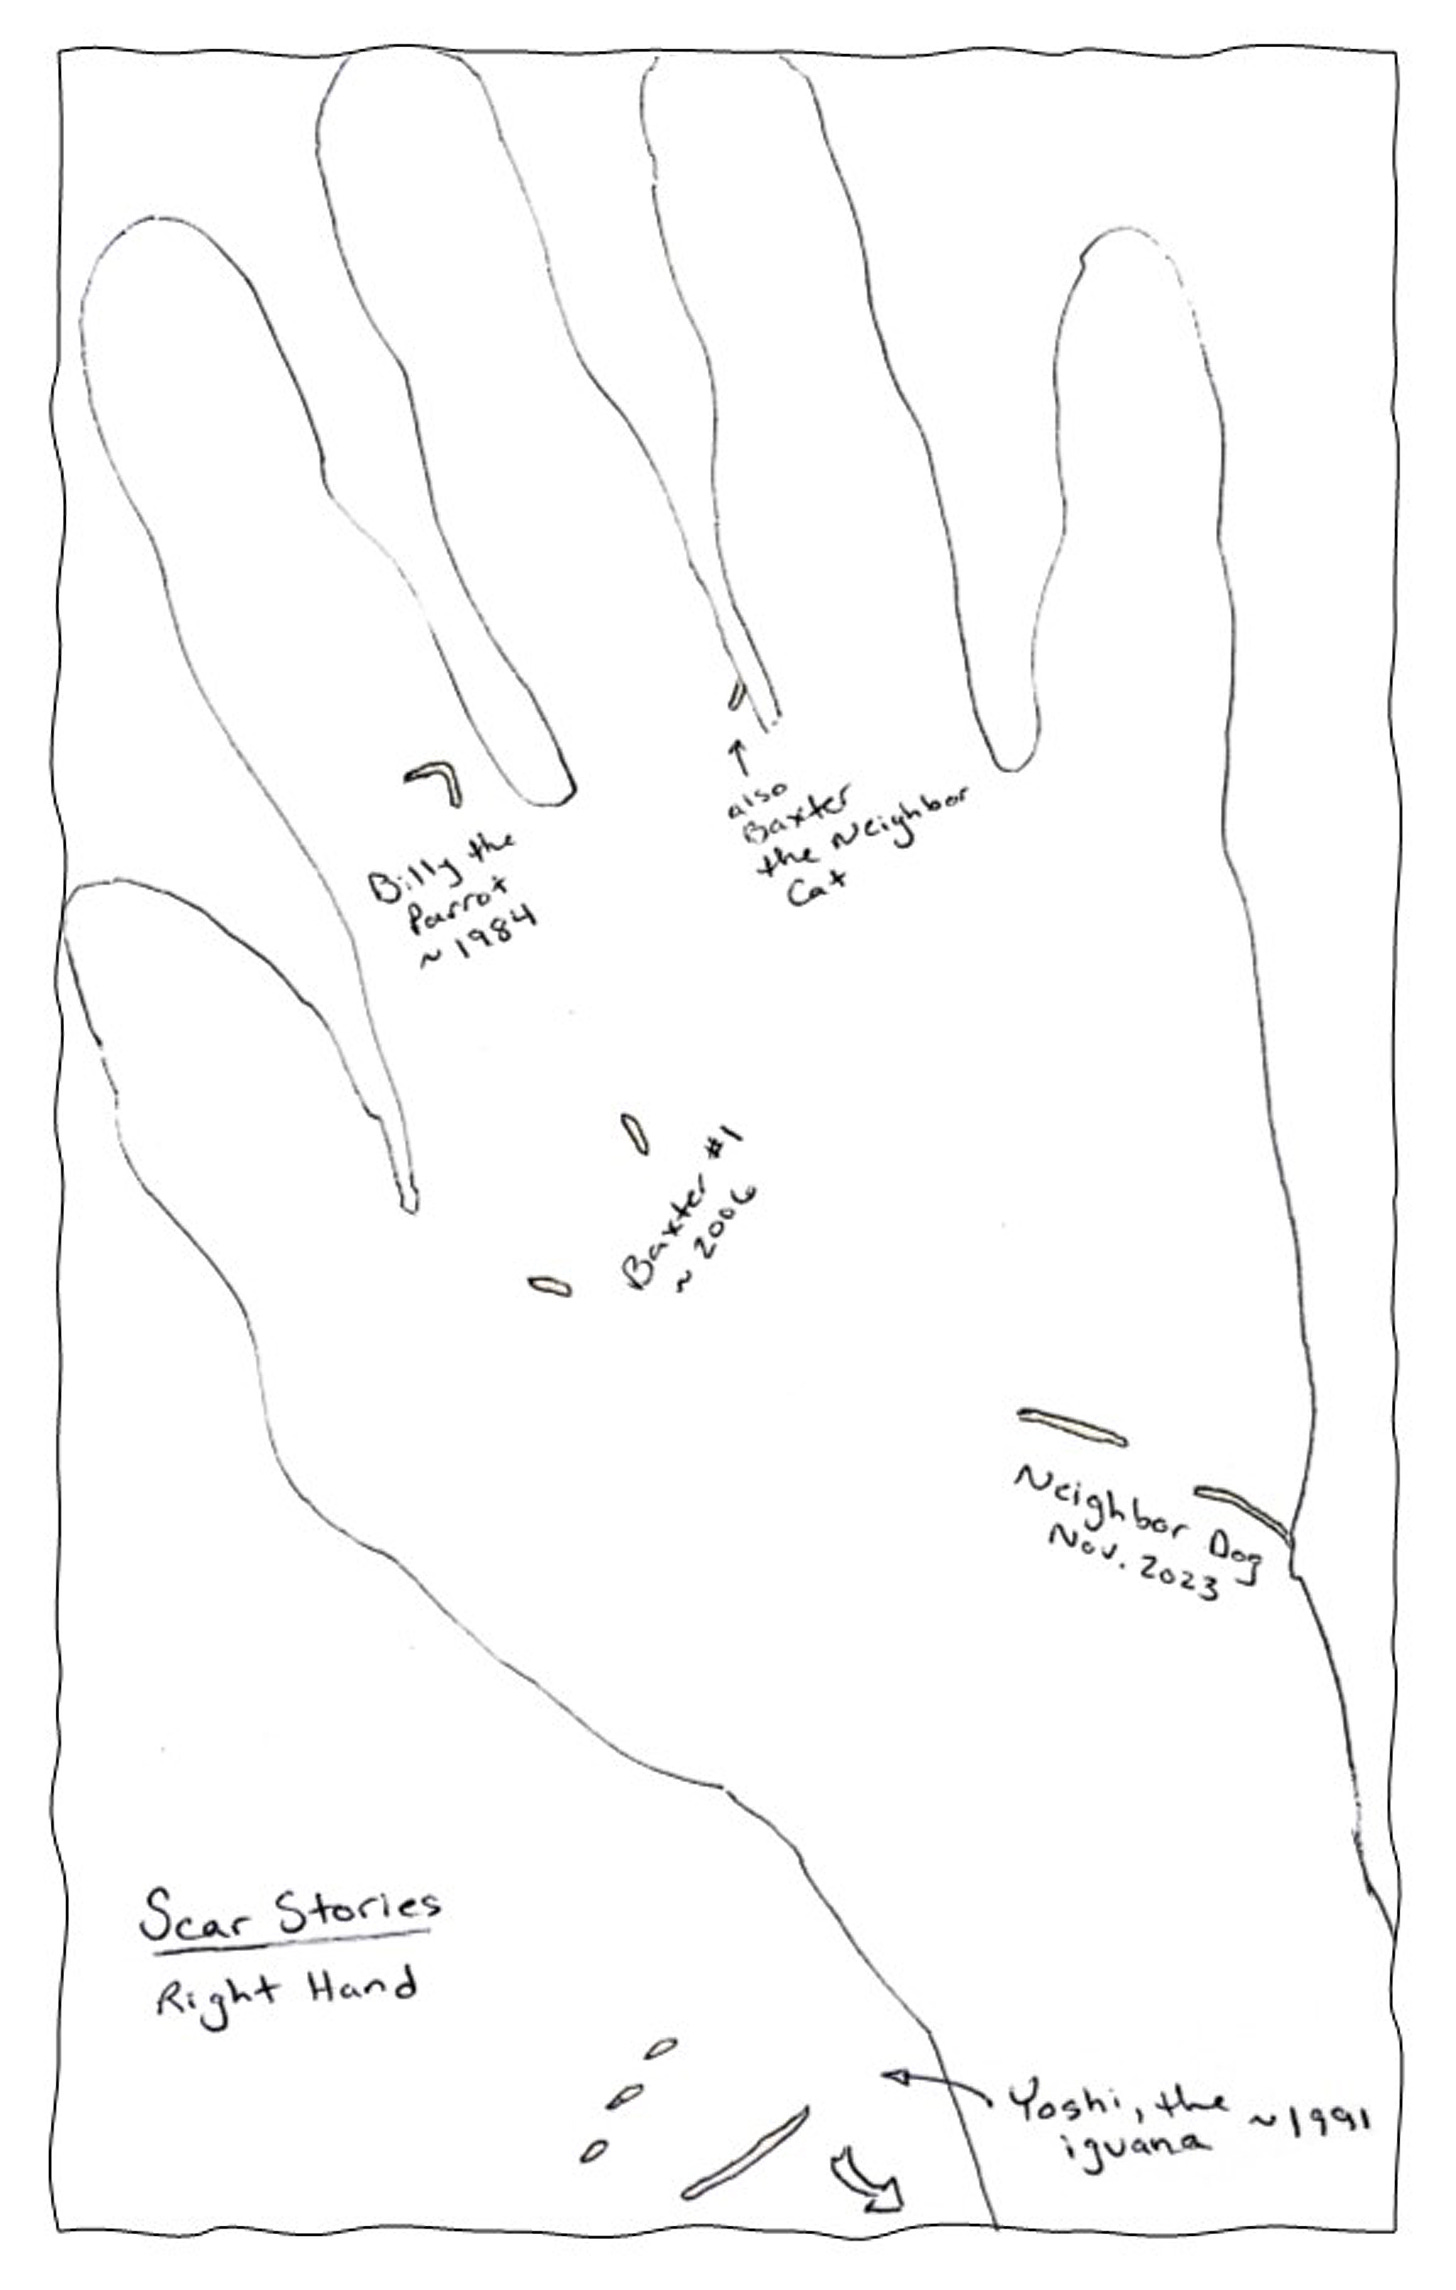 This is a tracing of my right hand with scars drawn in over the top of it.  Each scar, or group of scars, is labeled with a description of the animal who made the mark and an estimated date of when the scar was inscribed on my skin.  In the lower left portion of the sketch are the words, “Scar Stories: Right Hand.”  The various labels read: Billy the Parrot, ~1984.  Baxter #1, (the neighbor cat), ~2006.  Neighbor Dog, November 2023.  Yoshi, the Iguana, ~1991.